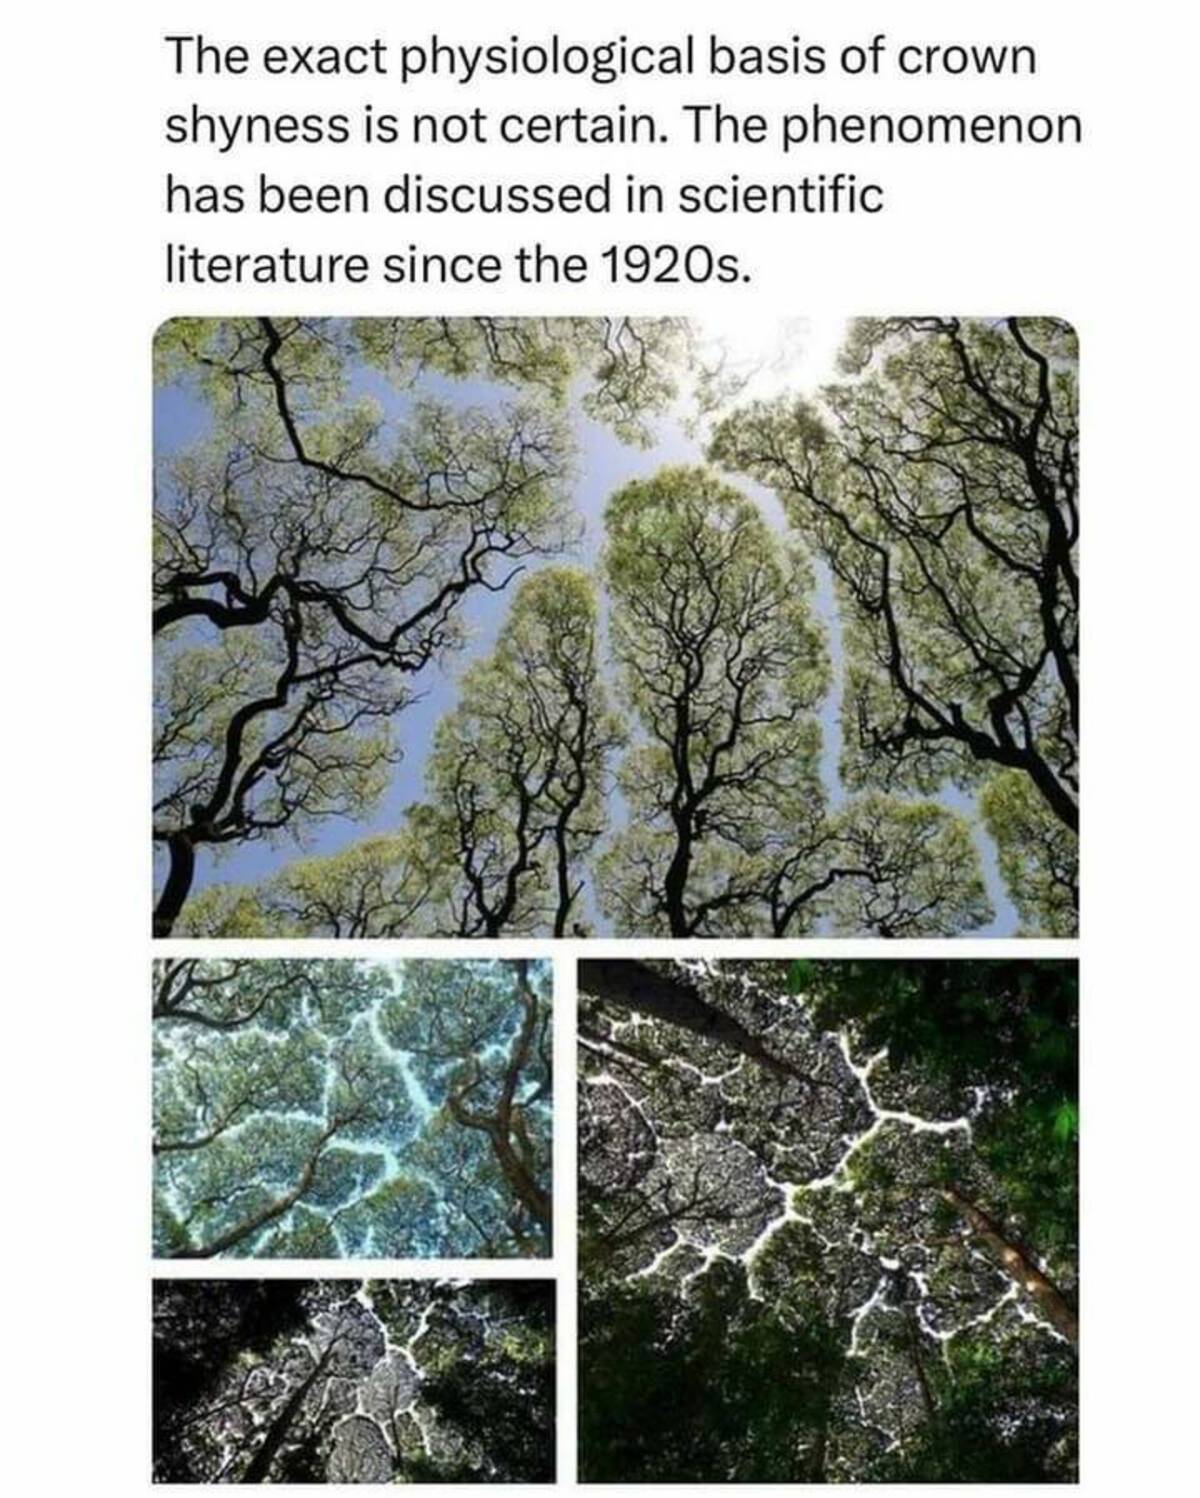 exact physiological basis of crown shyness is not certain the phenomenon has been discussed in scientific literature since the 1920s a prominent hypothesis - The exact physiological basis of crown shyness is not certain. The phenomenon has been discussed 